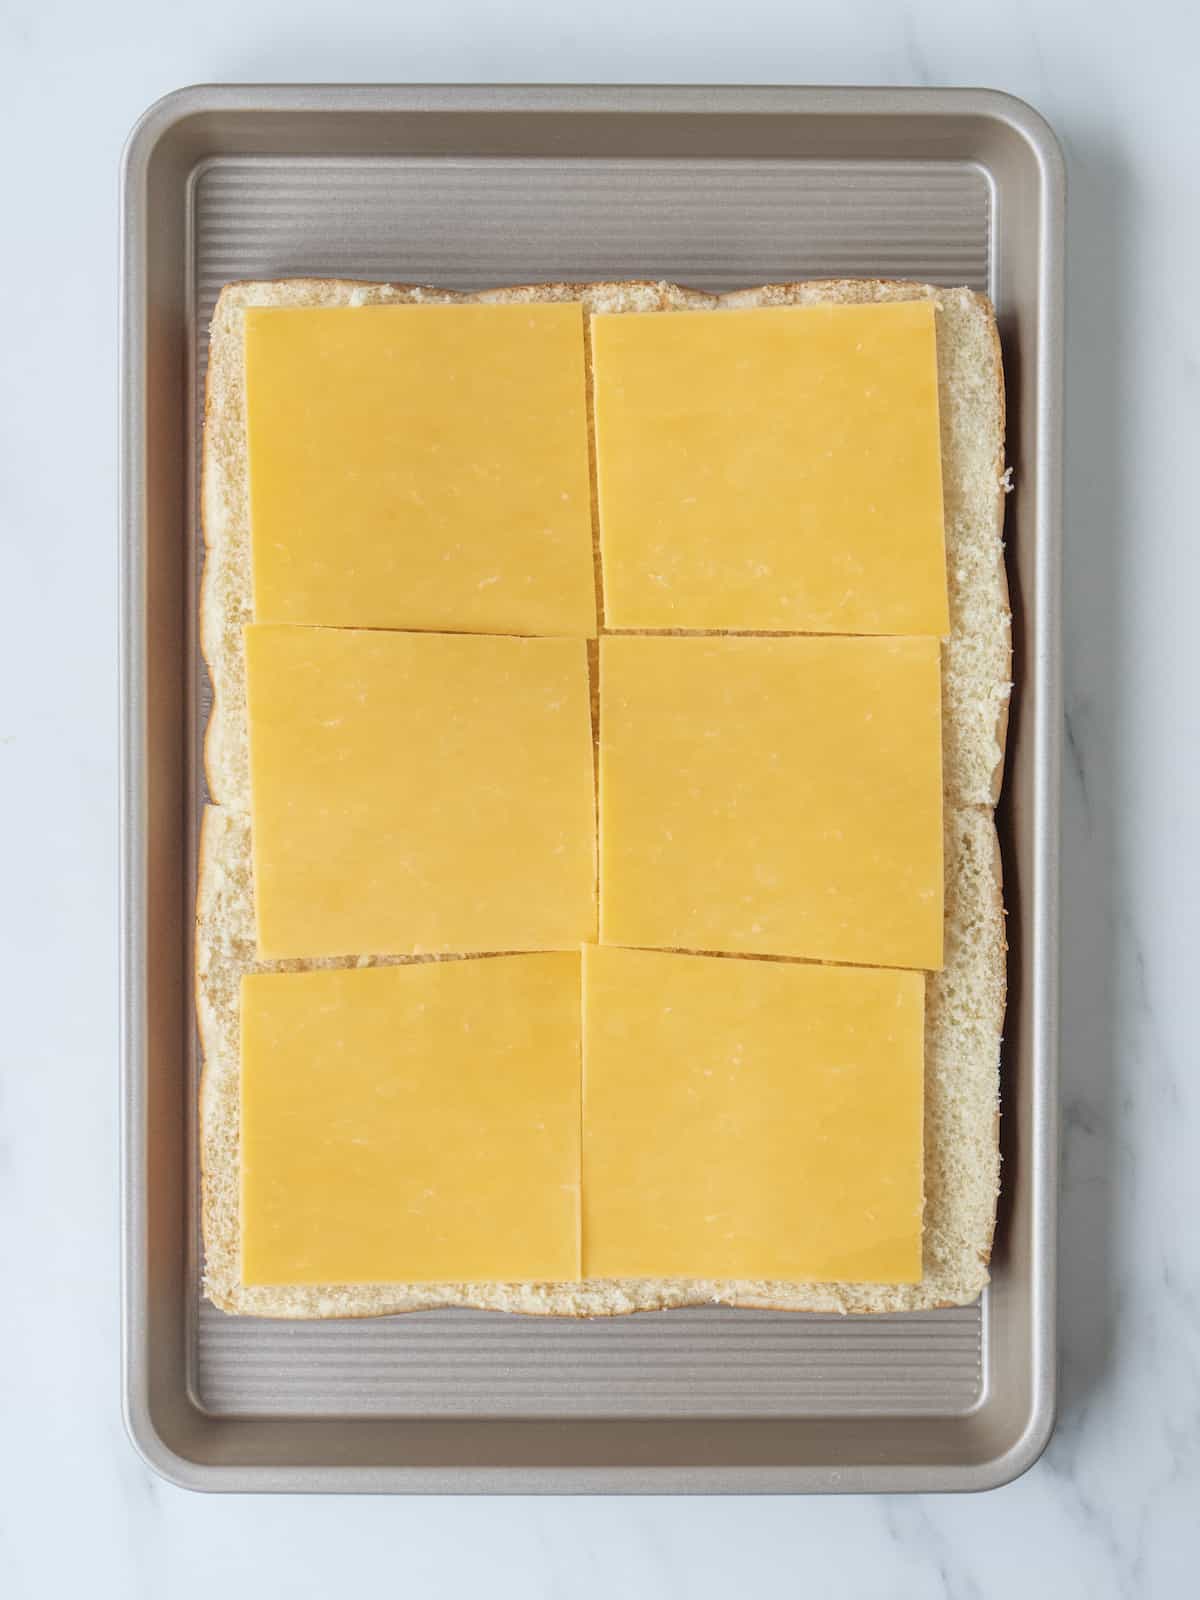 A baking sheet with a 3x4 grid of bottom half of slider buns topped with slices of cheddar cheese.